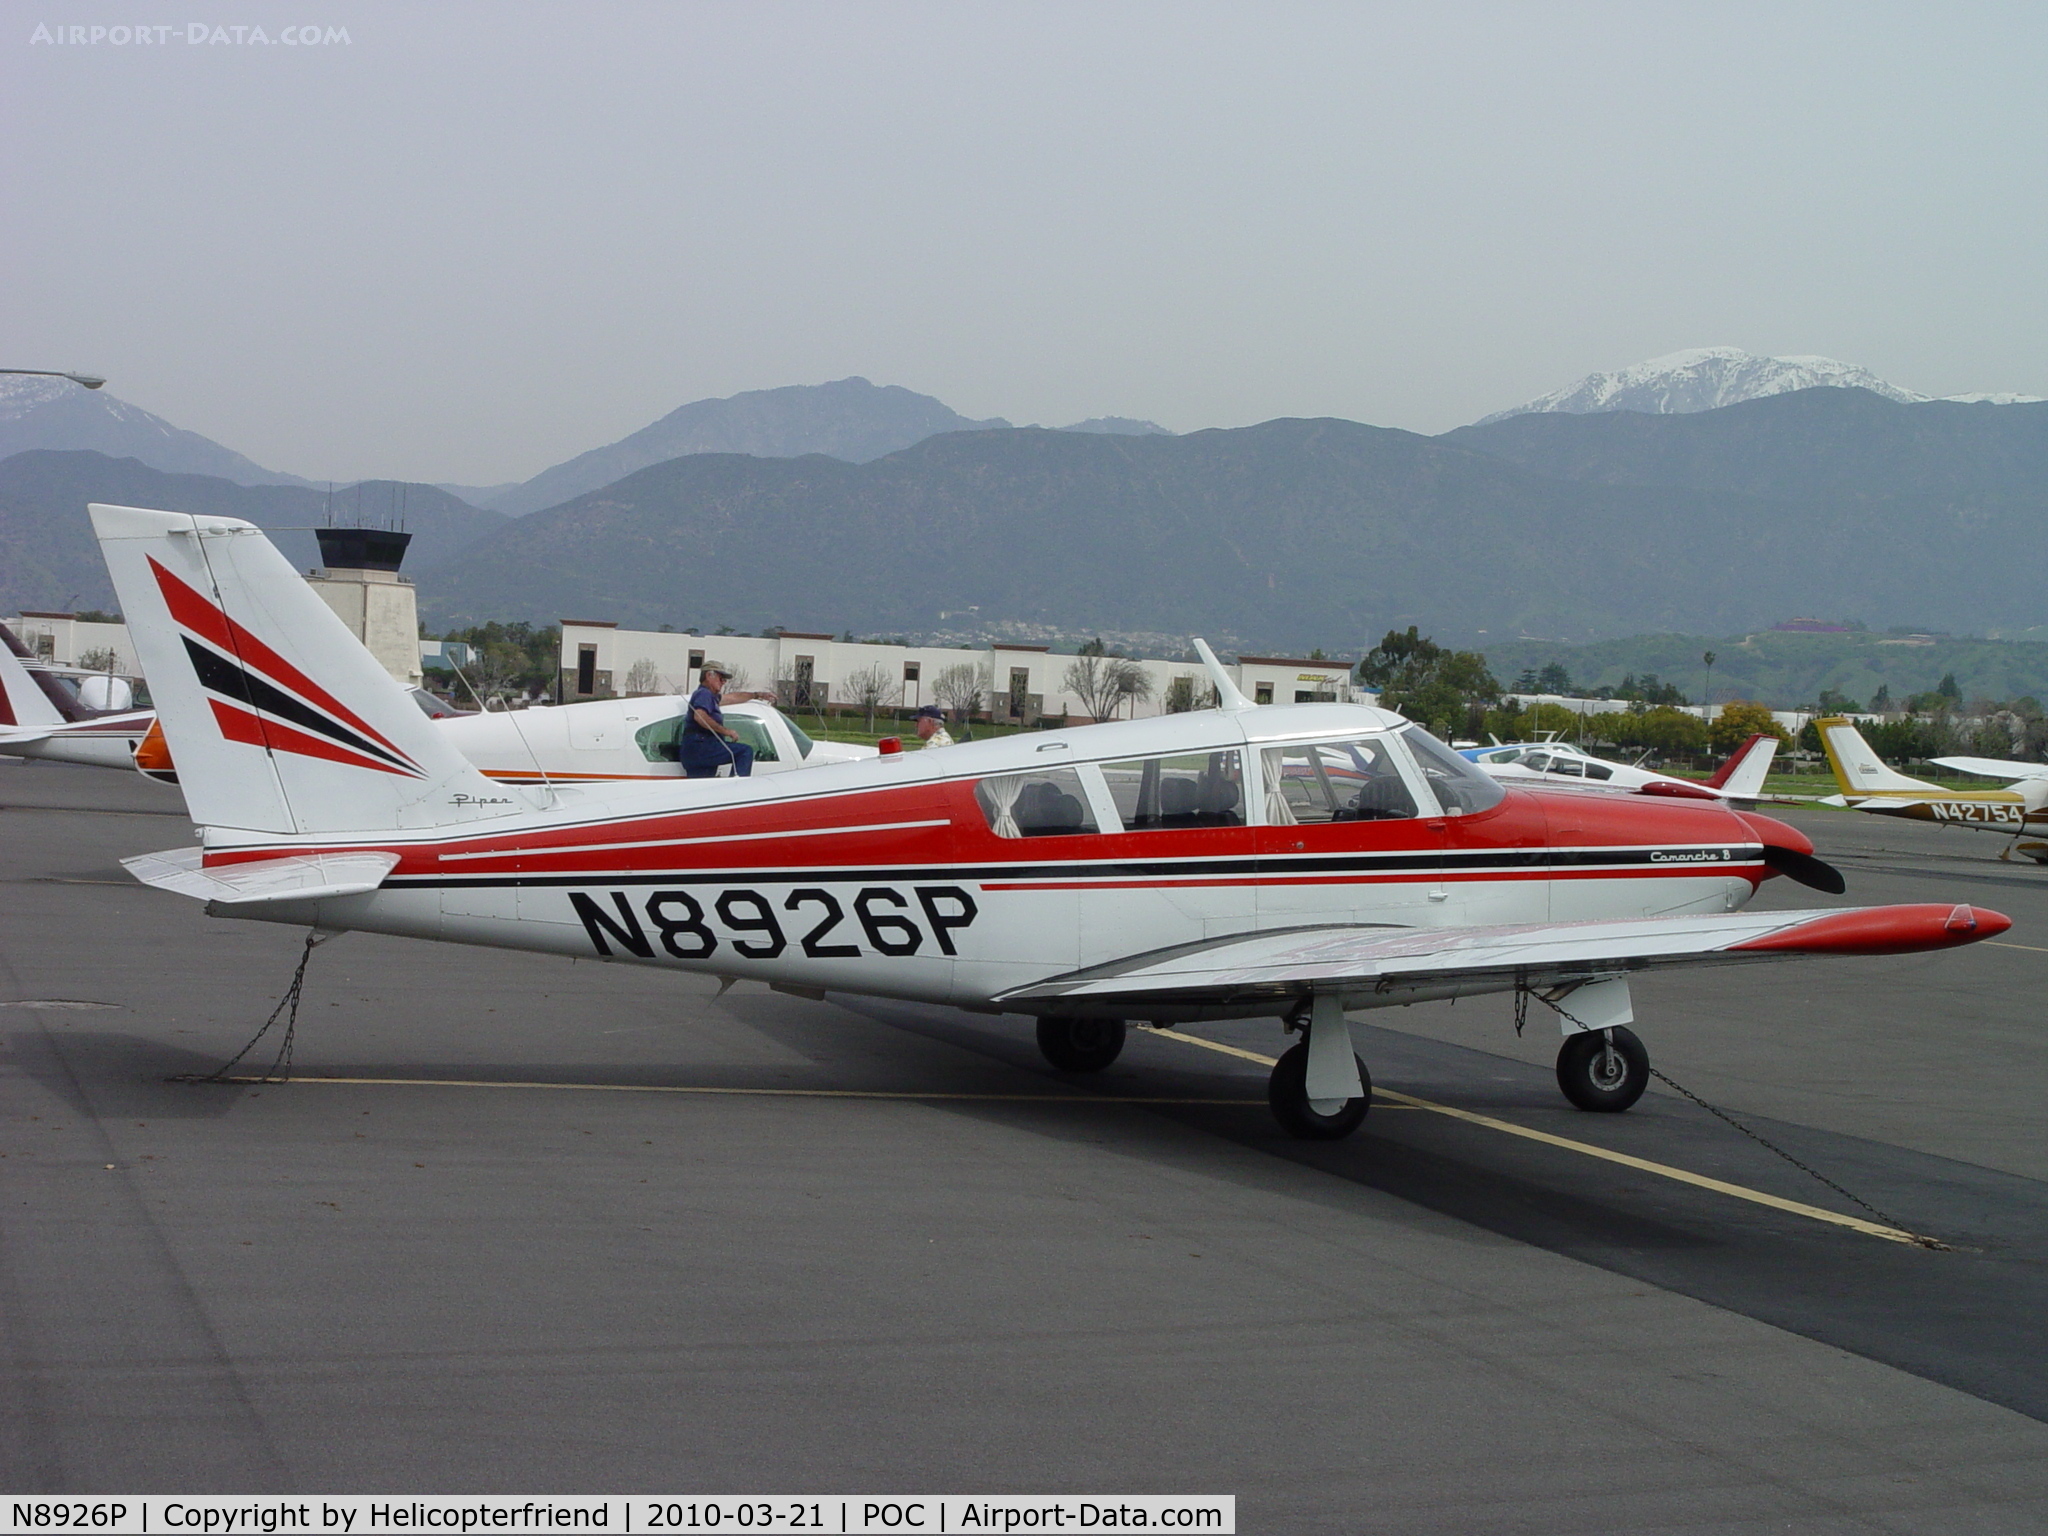 N8926P, Piper PA-24-260 Comanche C/N 24-4382, Parked at Brackett